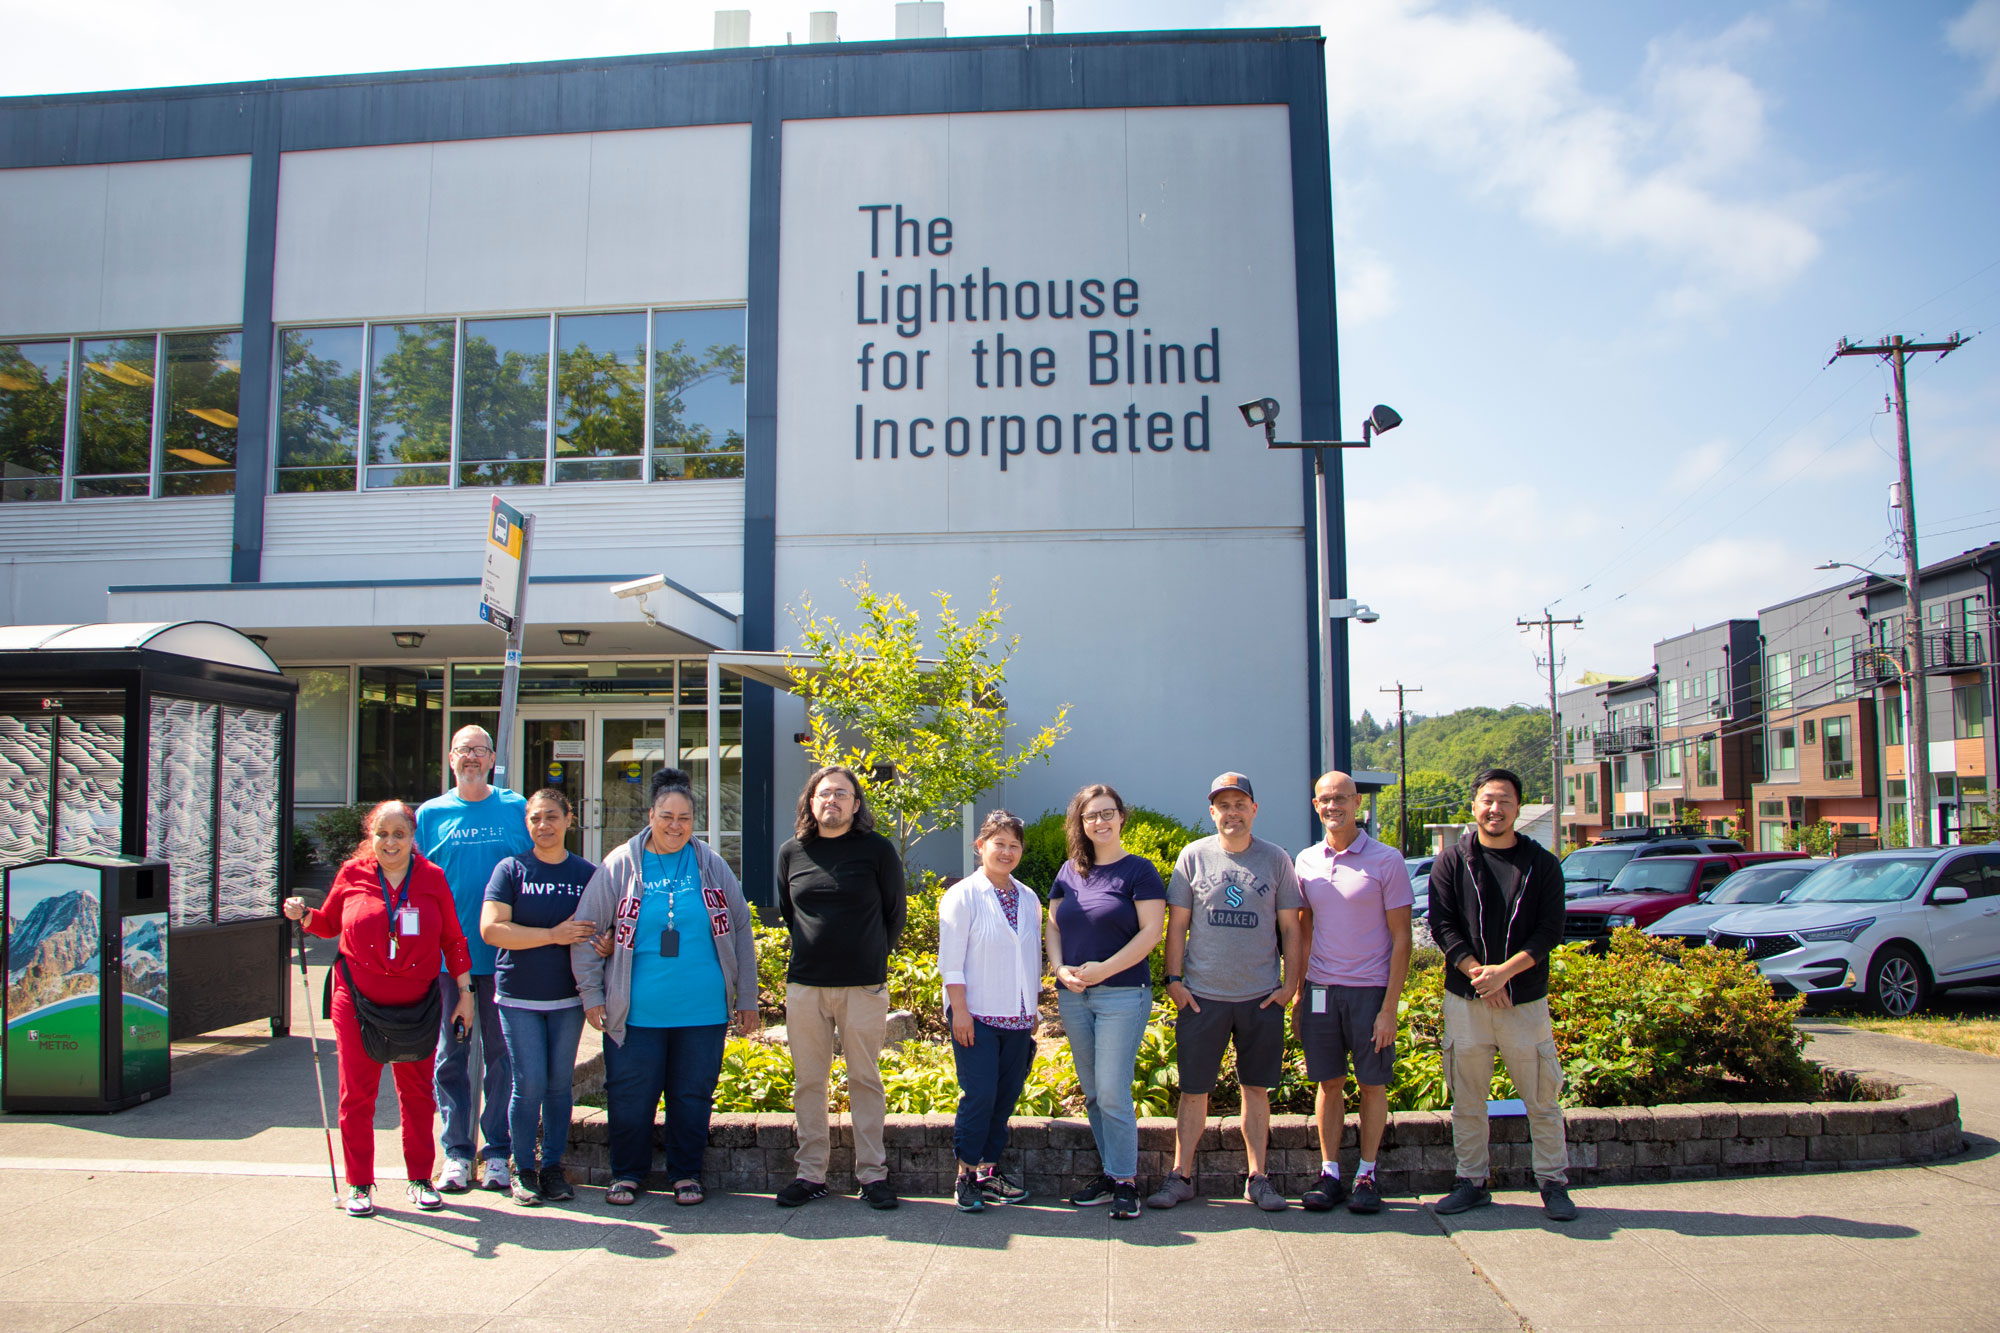 10 people stand outside in front of a large blue building with a logo reading "The Lighthouse for the Blind, Incorporated"